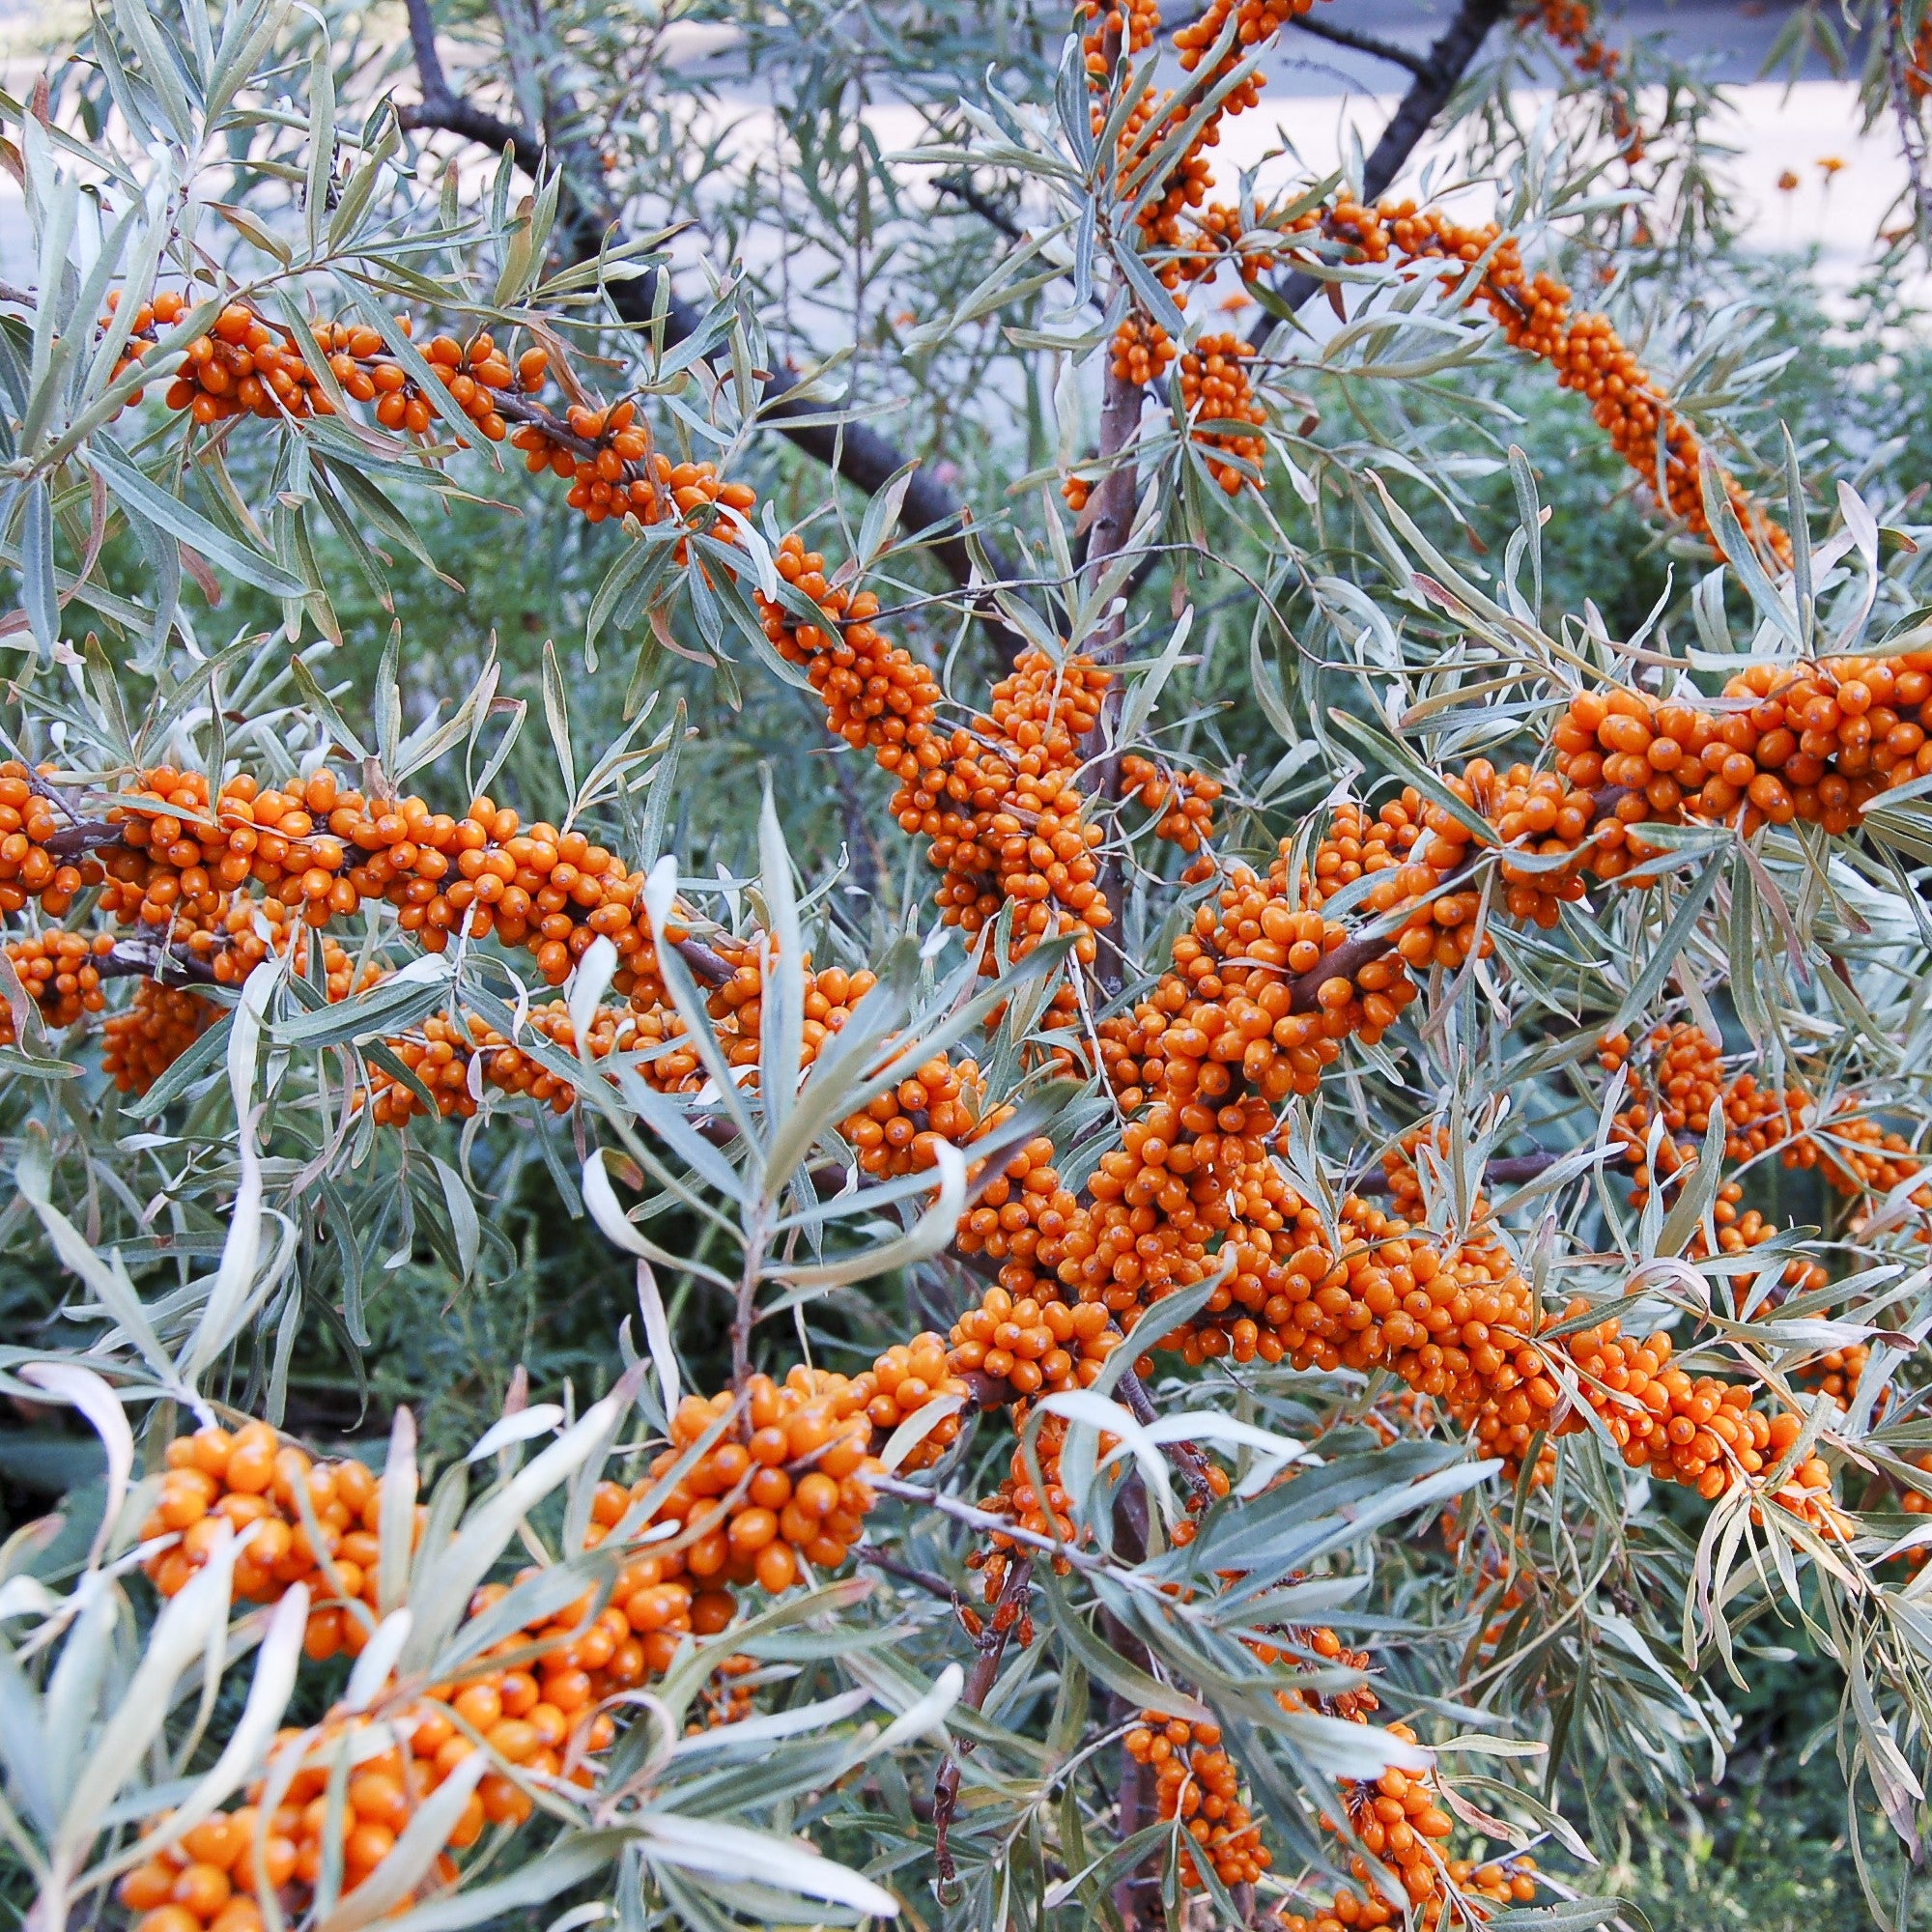 Sea Buckthorn Oil cold pressed